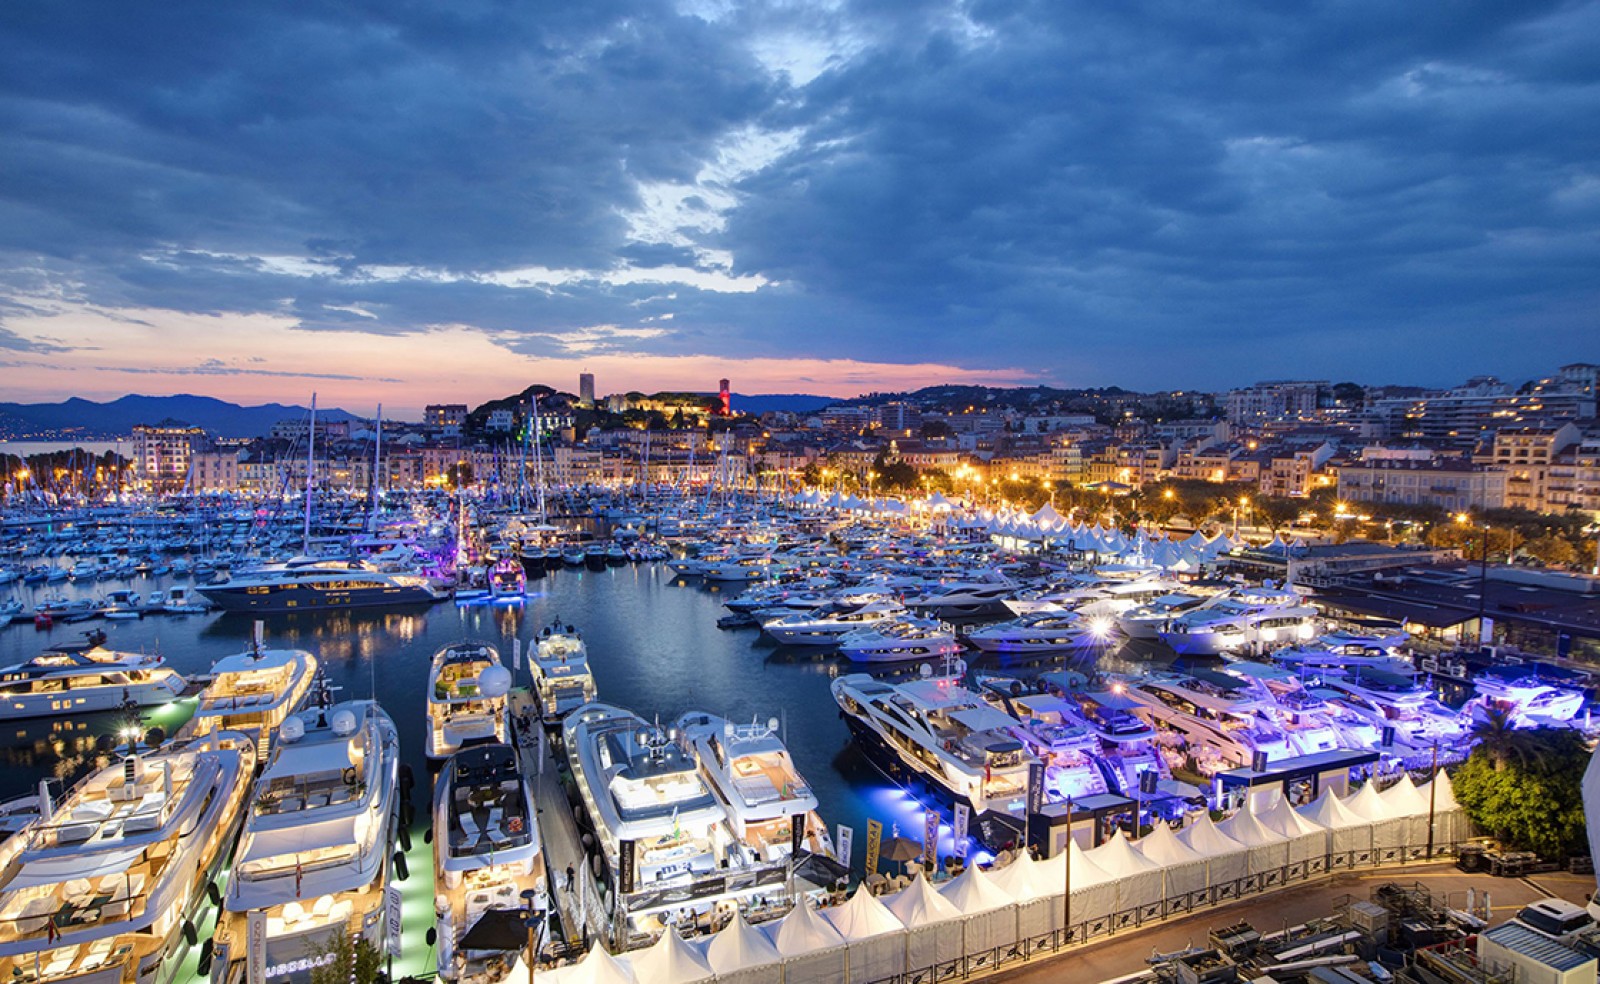 Private Chauffeur for Cannes Yachting Festival - Premium Vehicles & Services - Reactivity 24/7 - Ruby Services - Car Rental with Driver for Cannes Yachting Festival